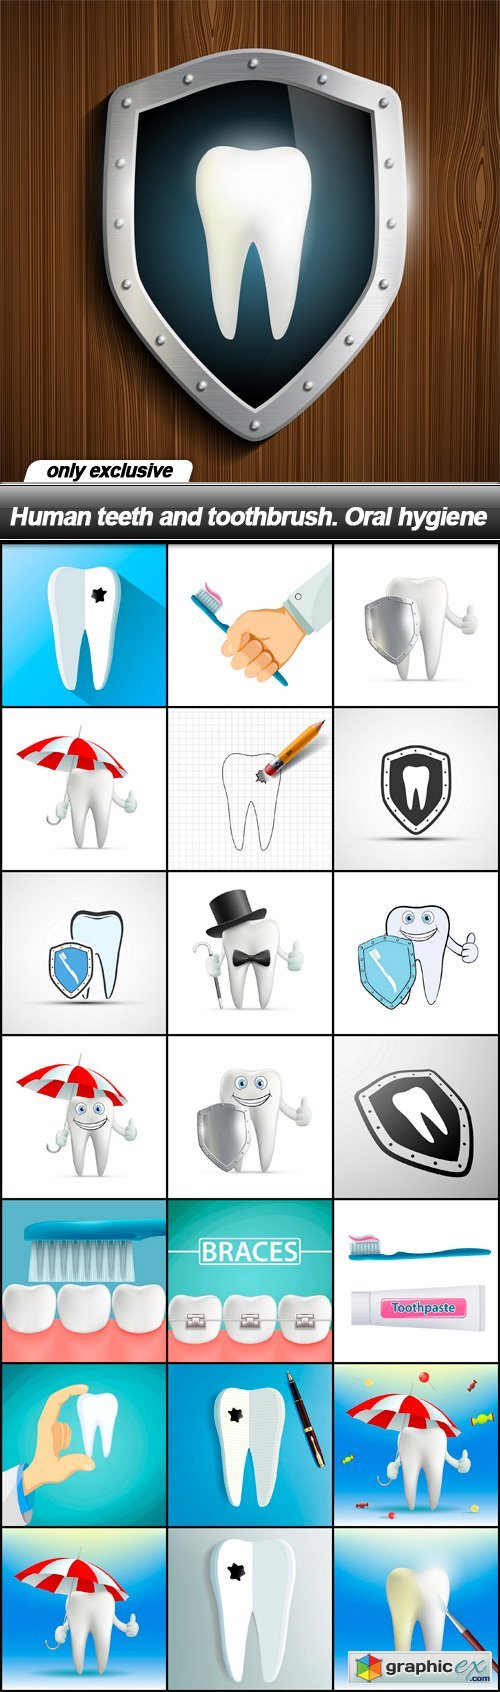 Human teeth and toothbrush. Oral hygiene - 22 EPS